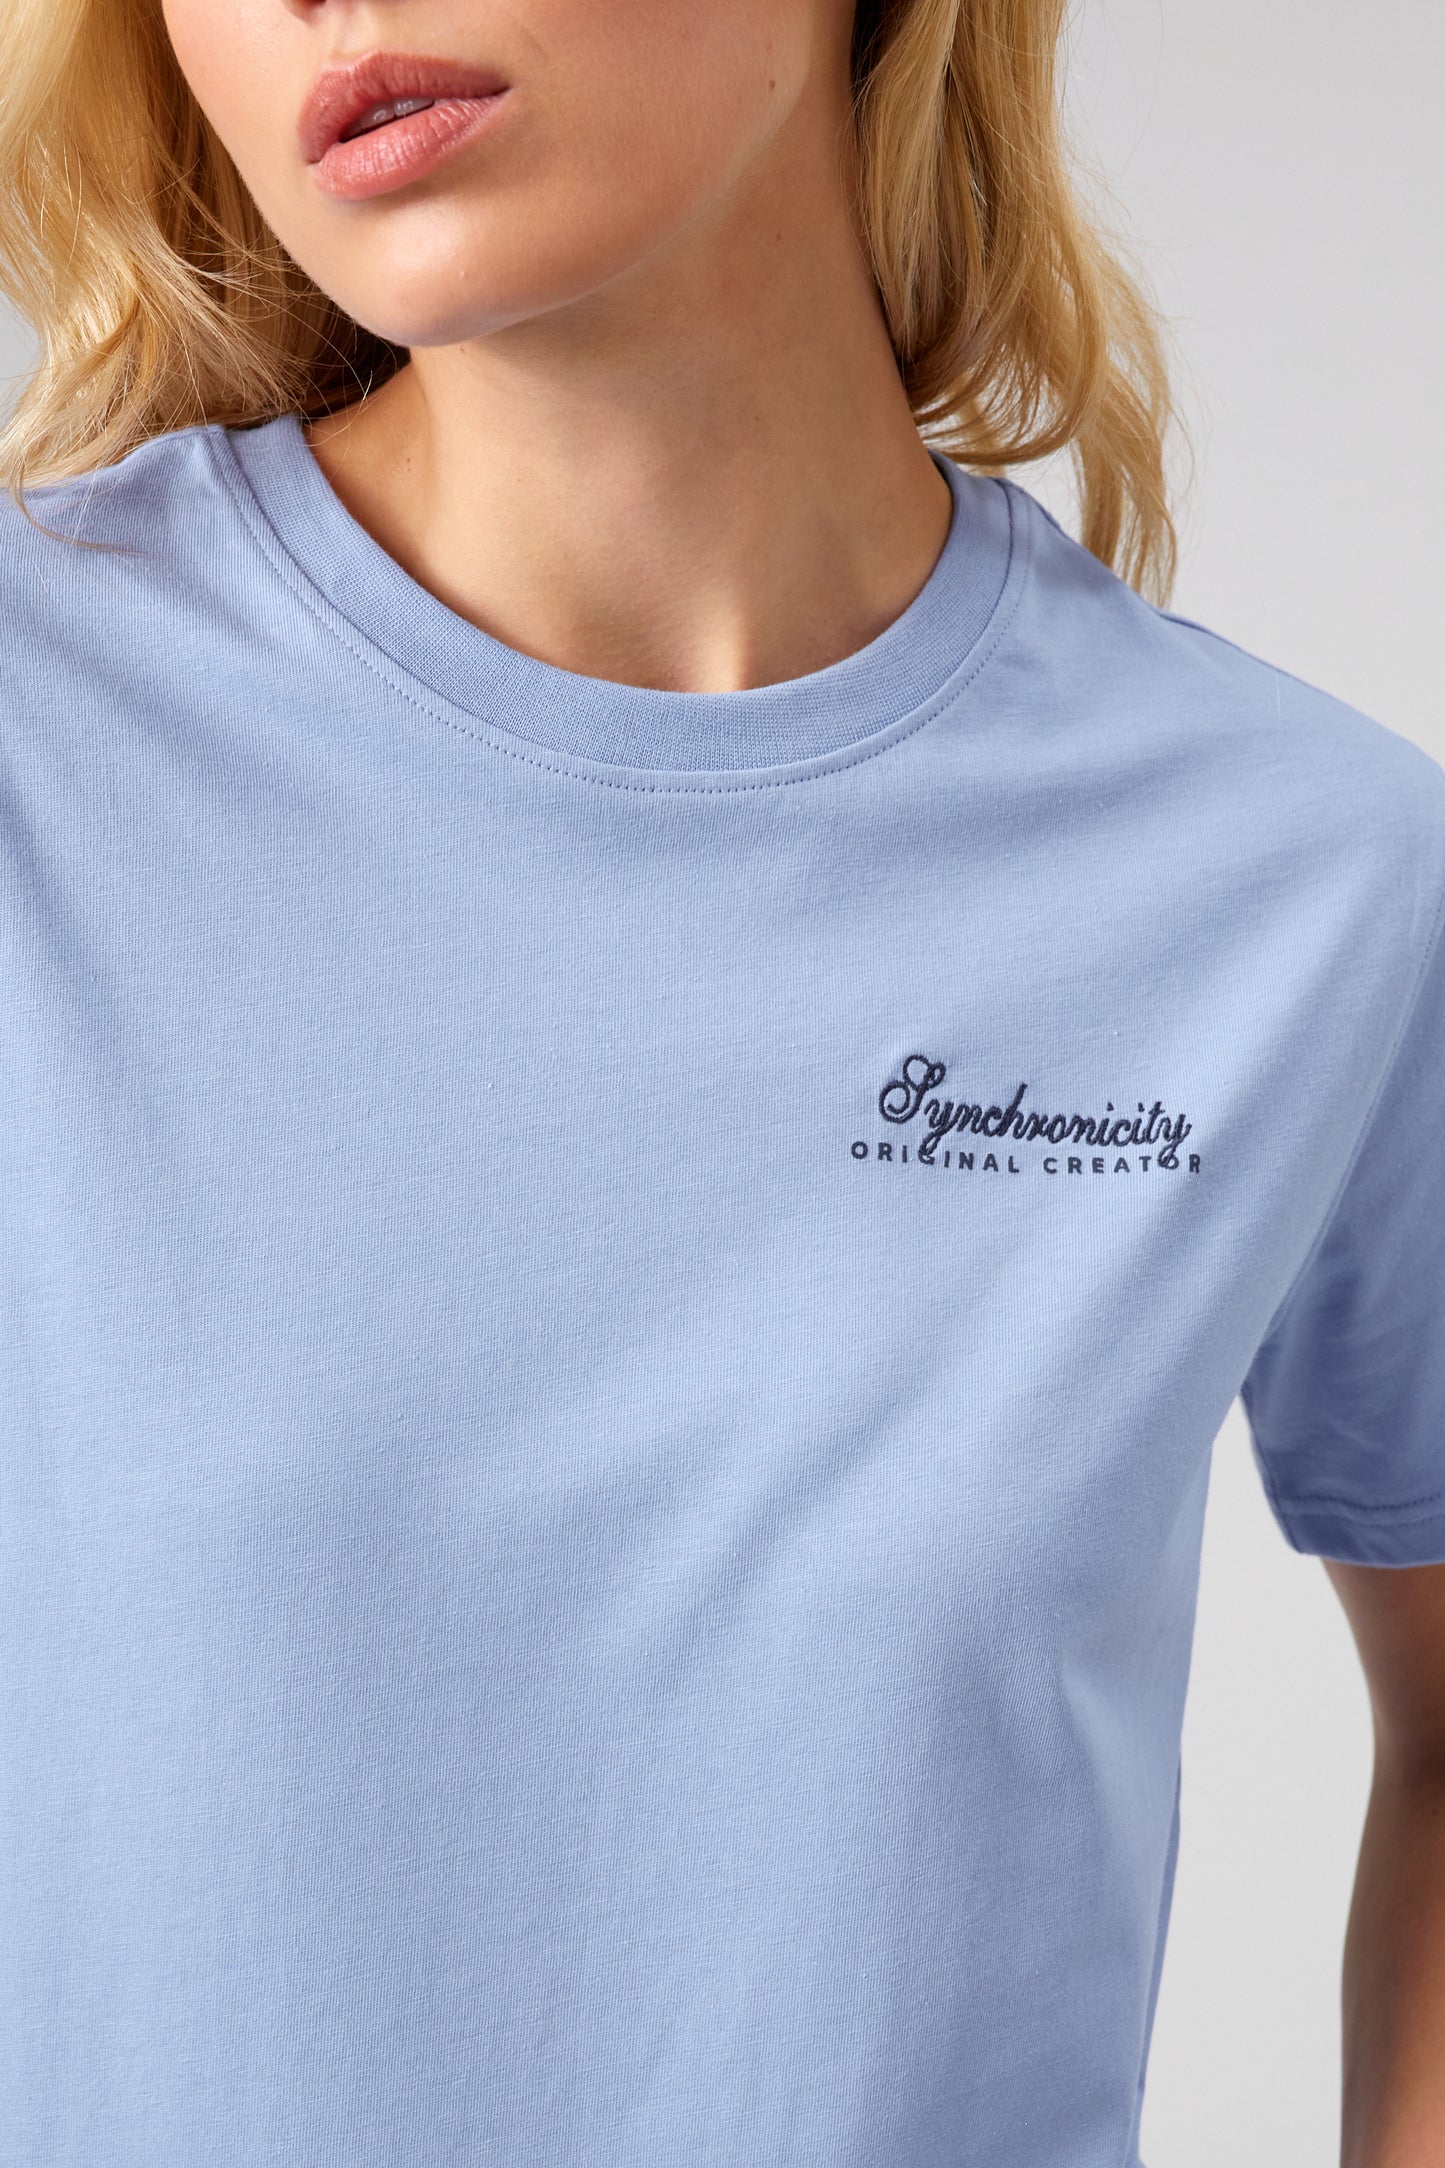 Synchronicity T-shirt - Periwinkle